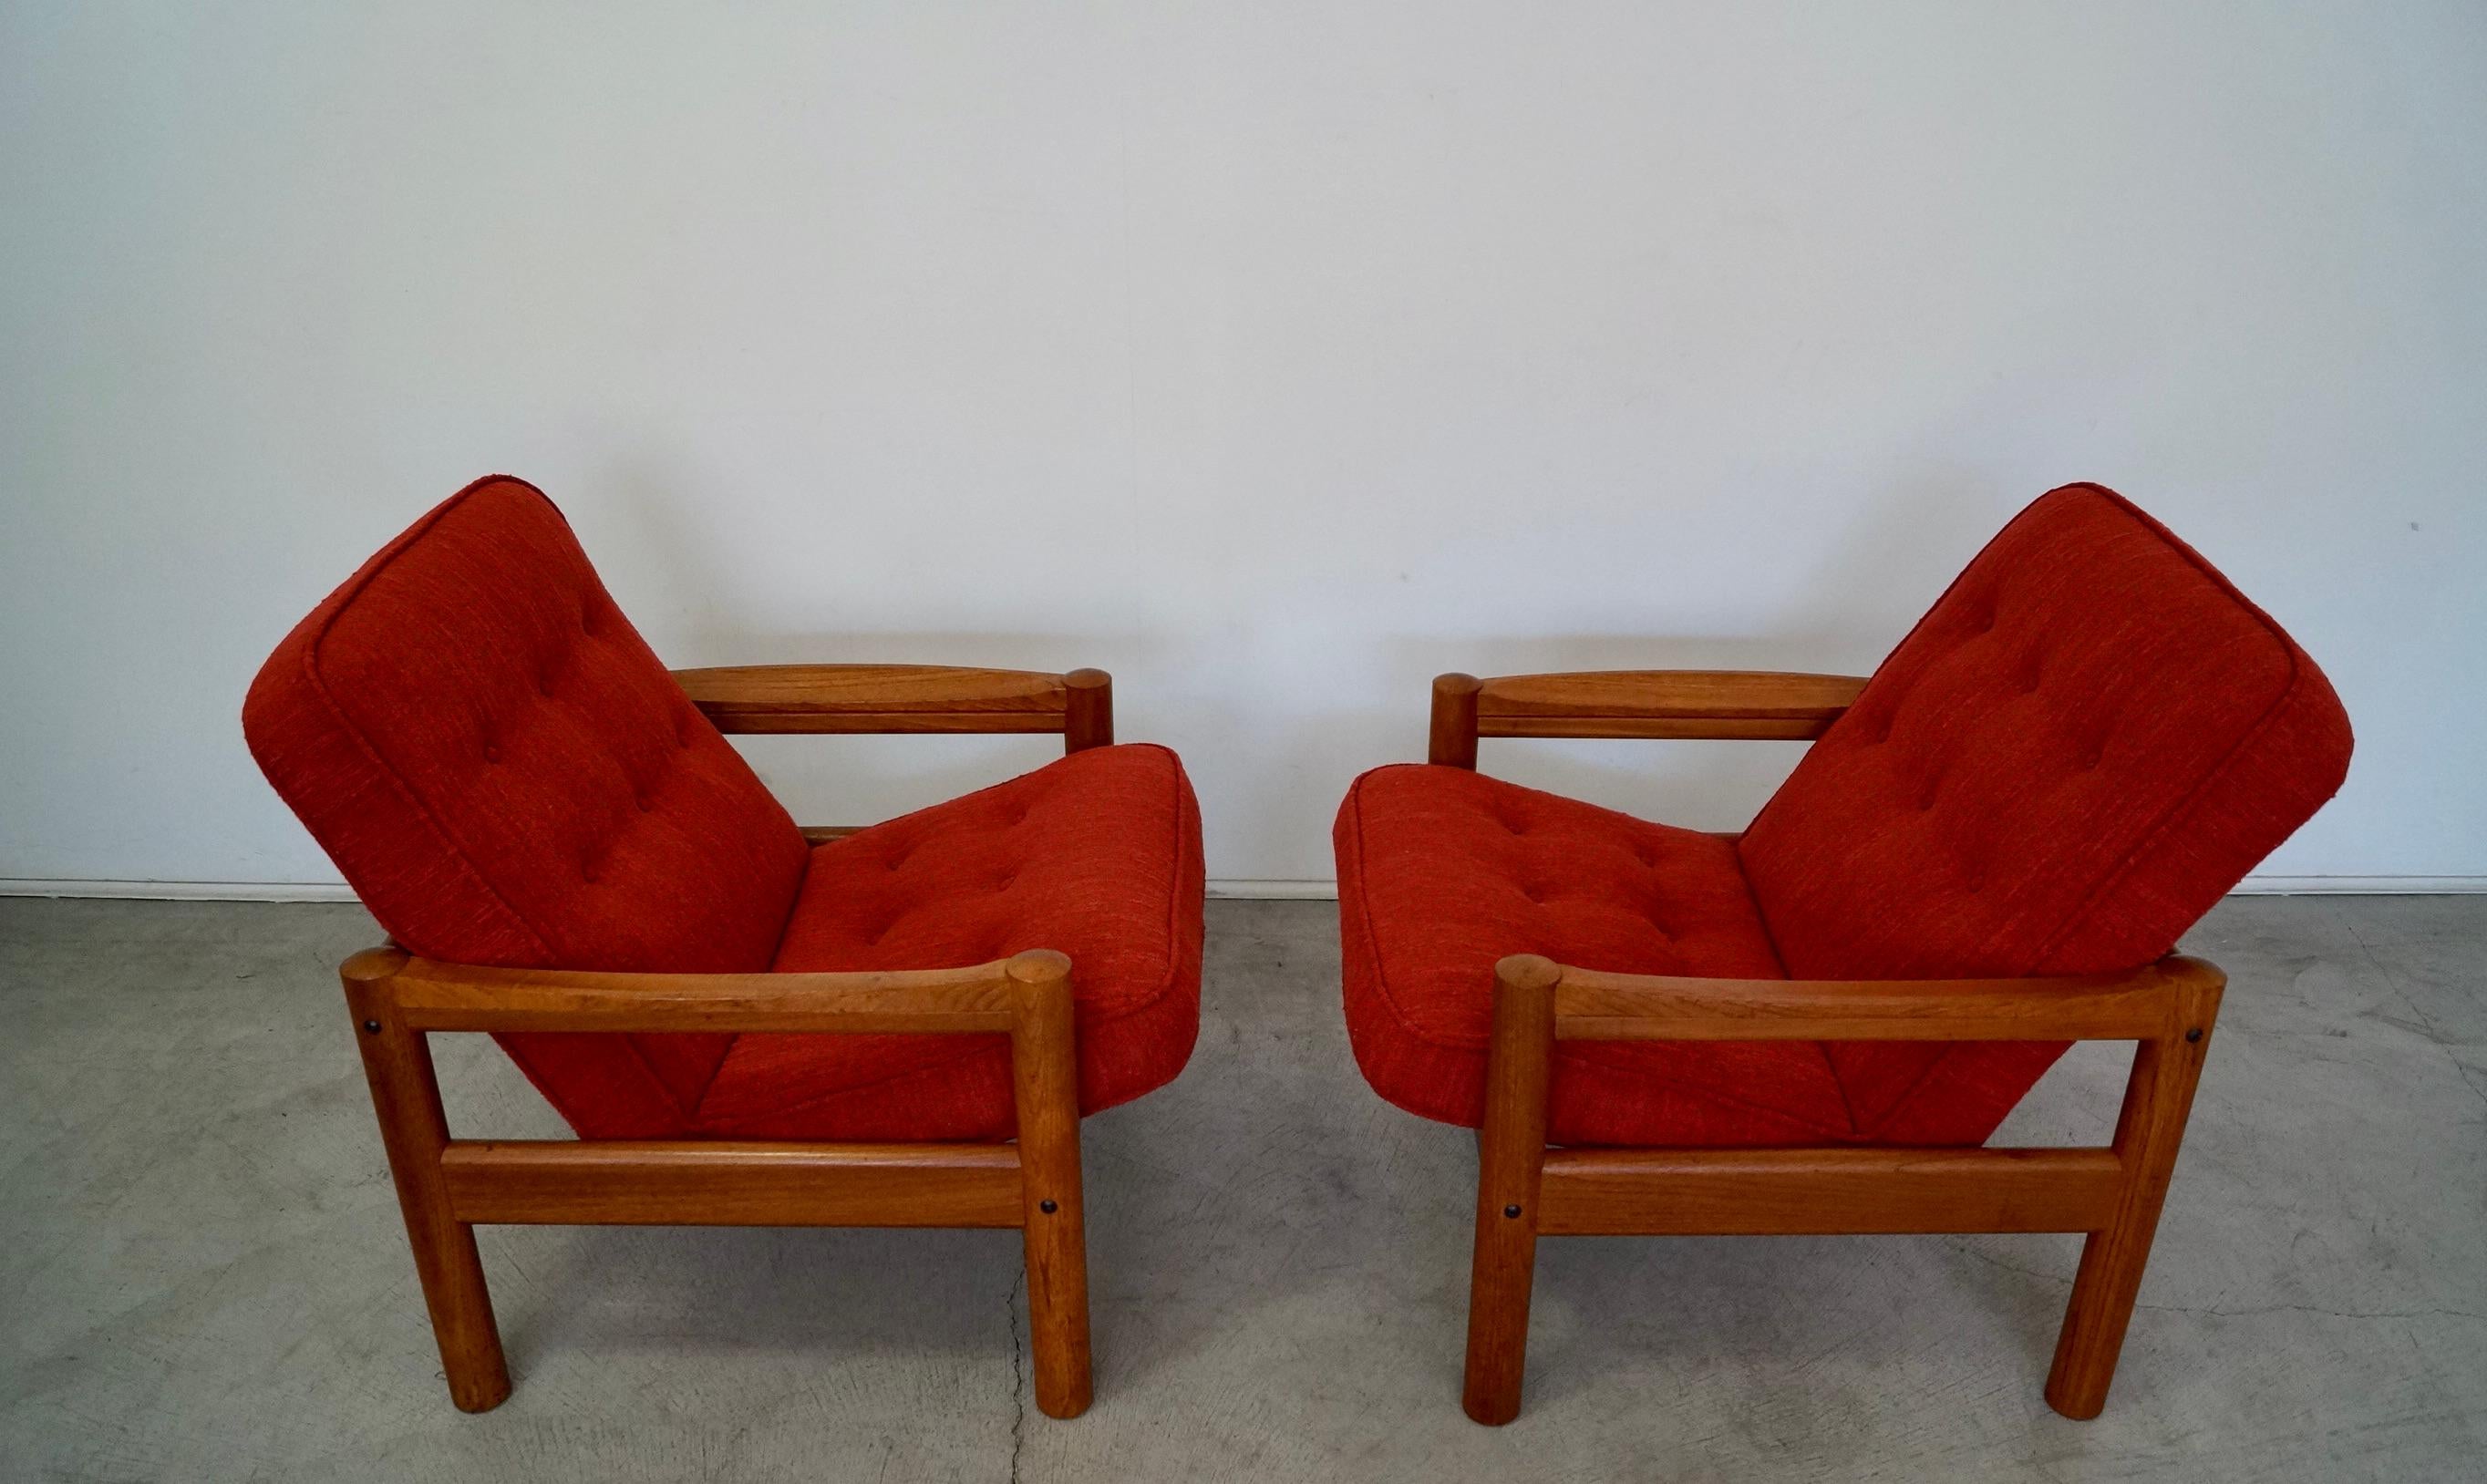 1970's Danish Modern Teak Lounge Chairs by Domino Mobler - a Pair For Sale 5